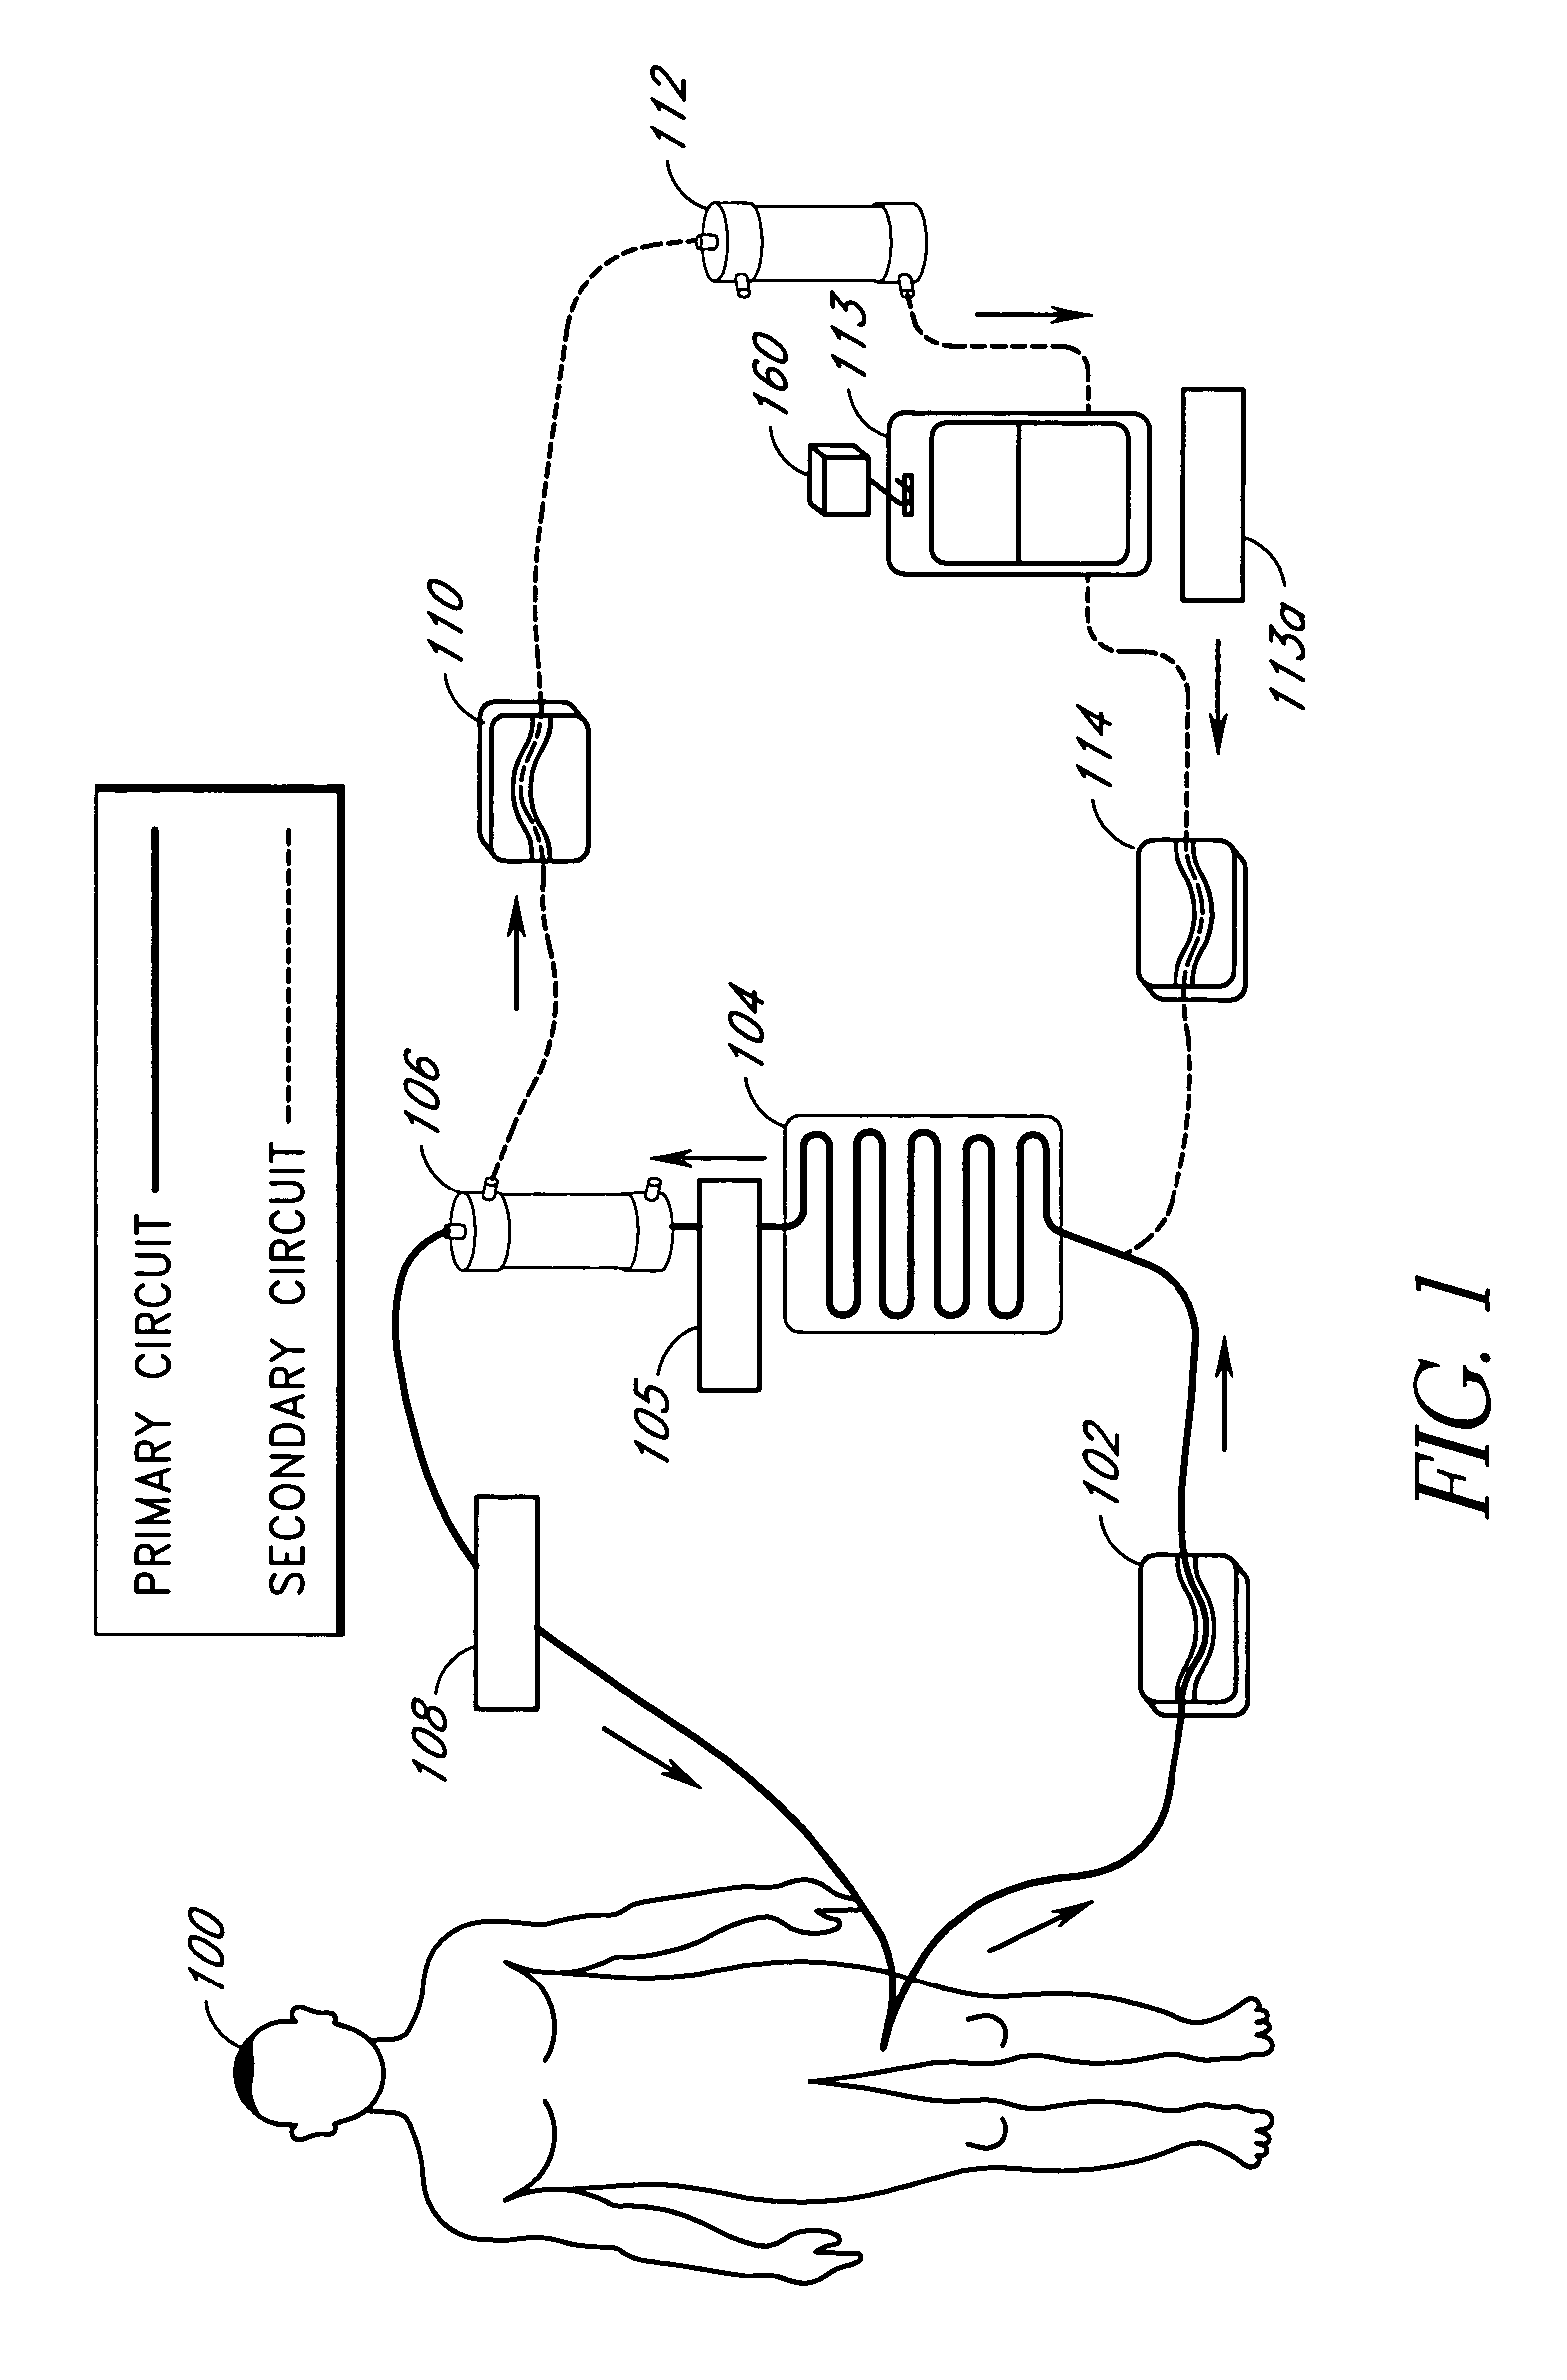 Apparatus and method for down-regulating immune system mediators in blood